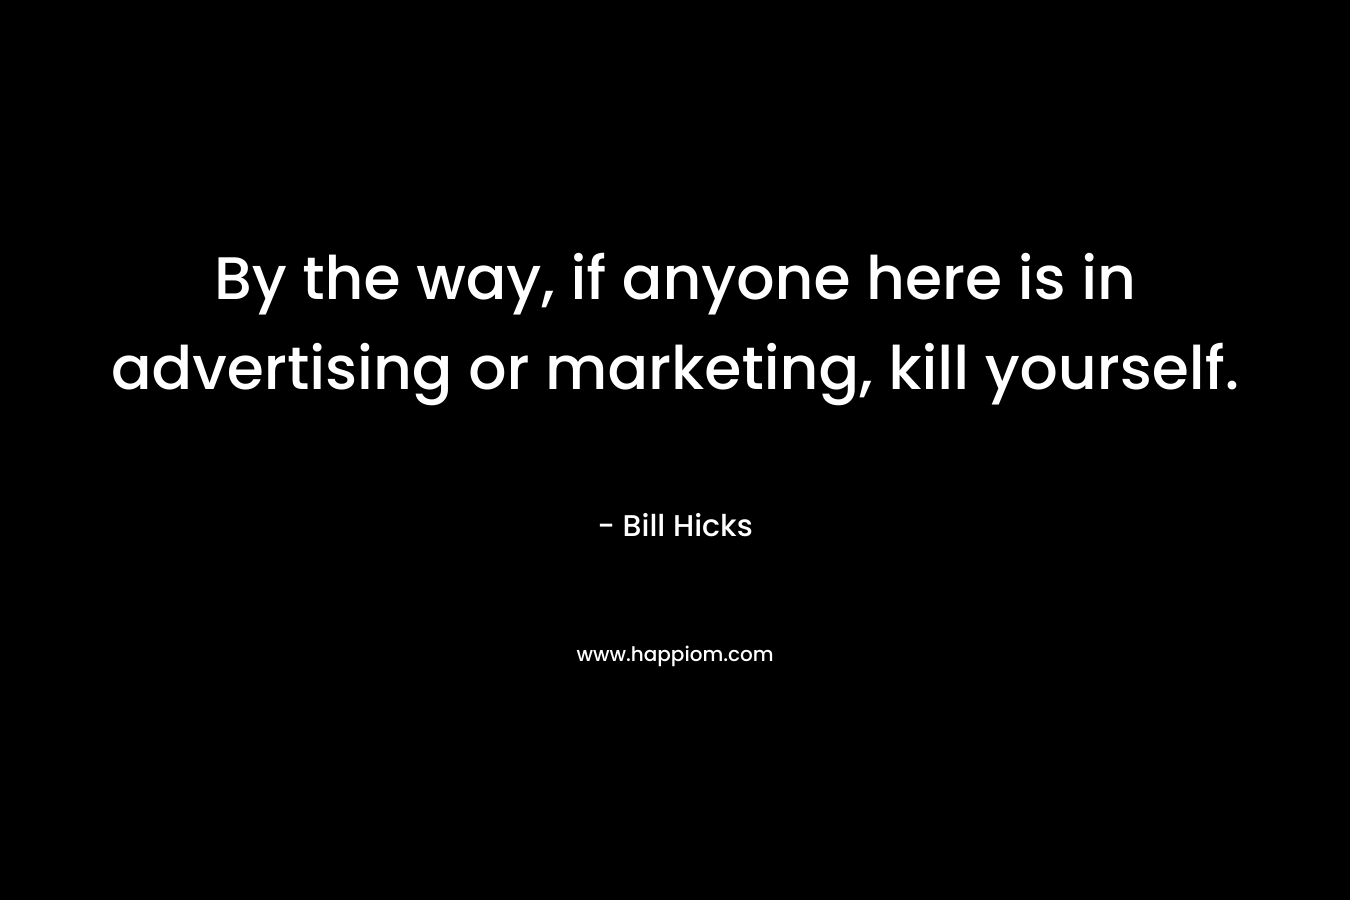 By the way, if anyone here is in advertising or marketing, kill yourself. – Bill Hicks